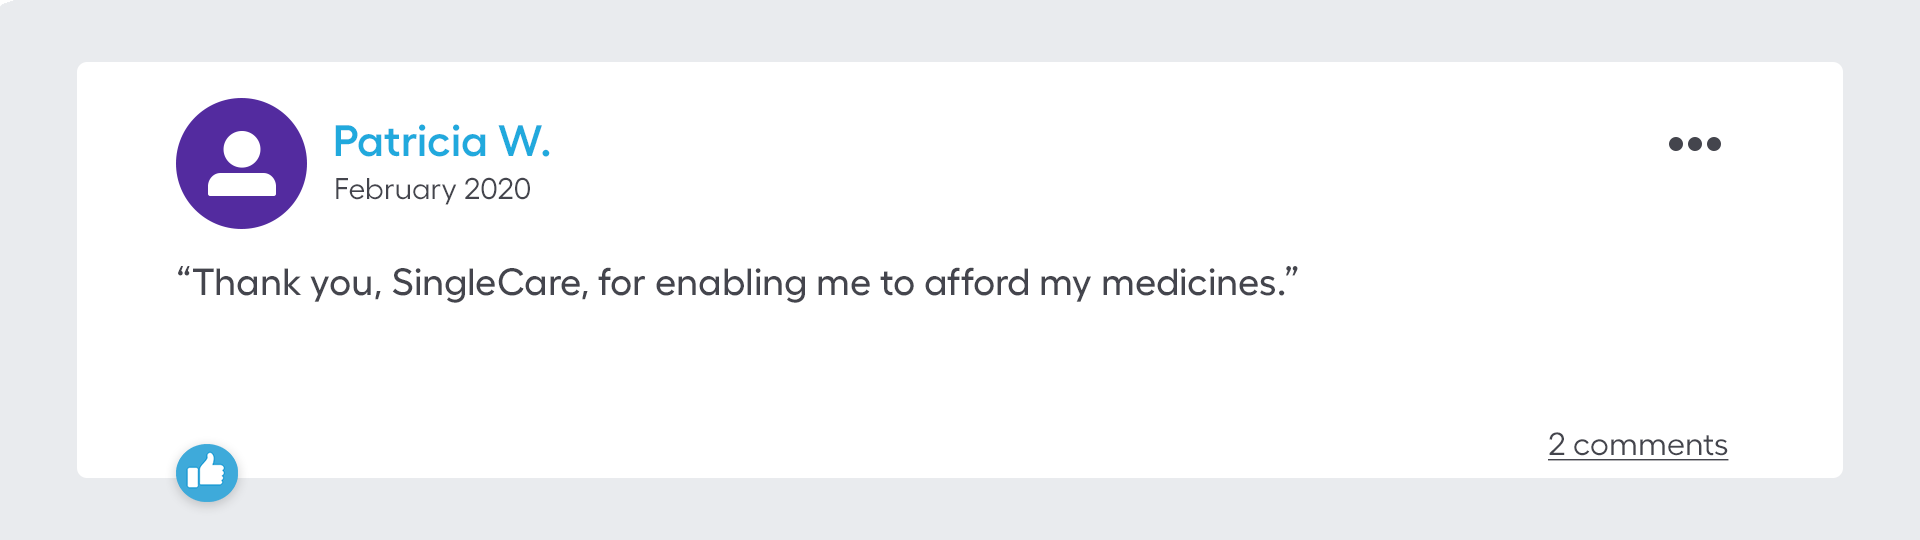 Thank you, SingleCare, for enabling me to afford my medicines.